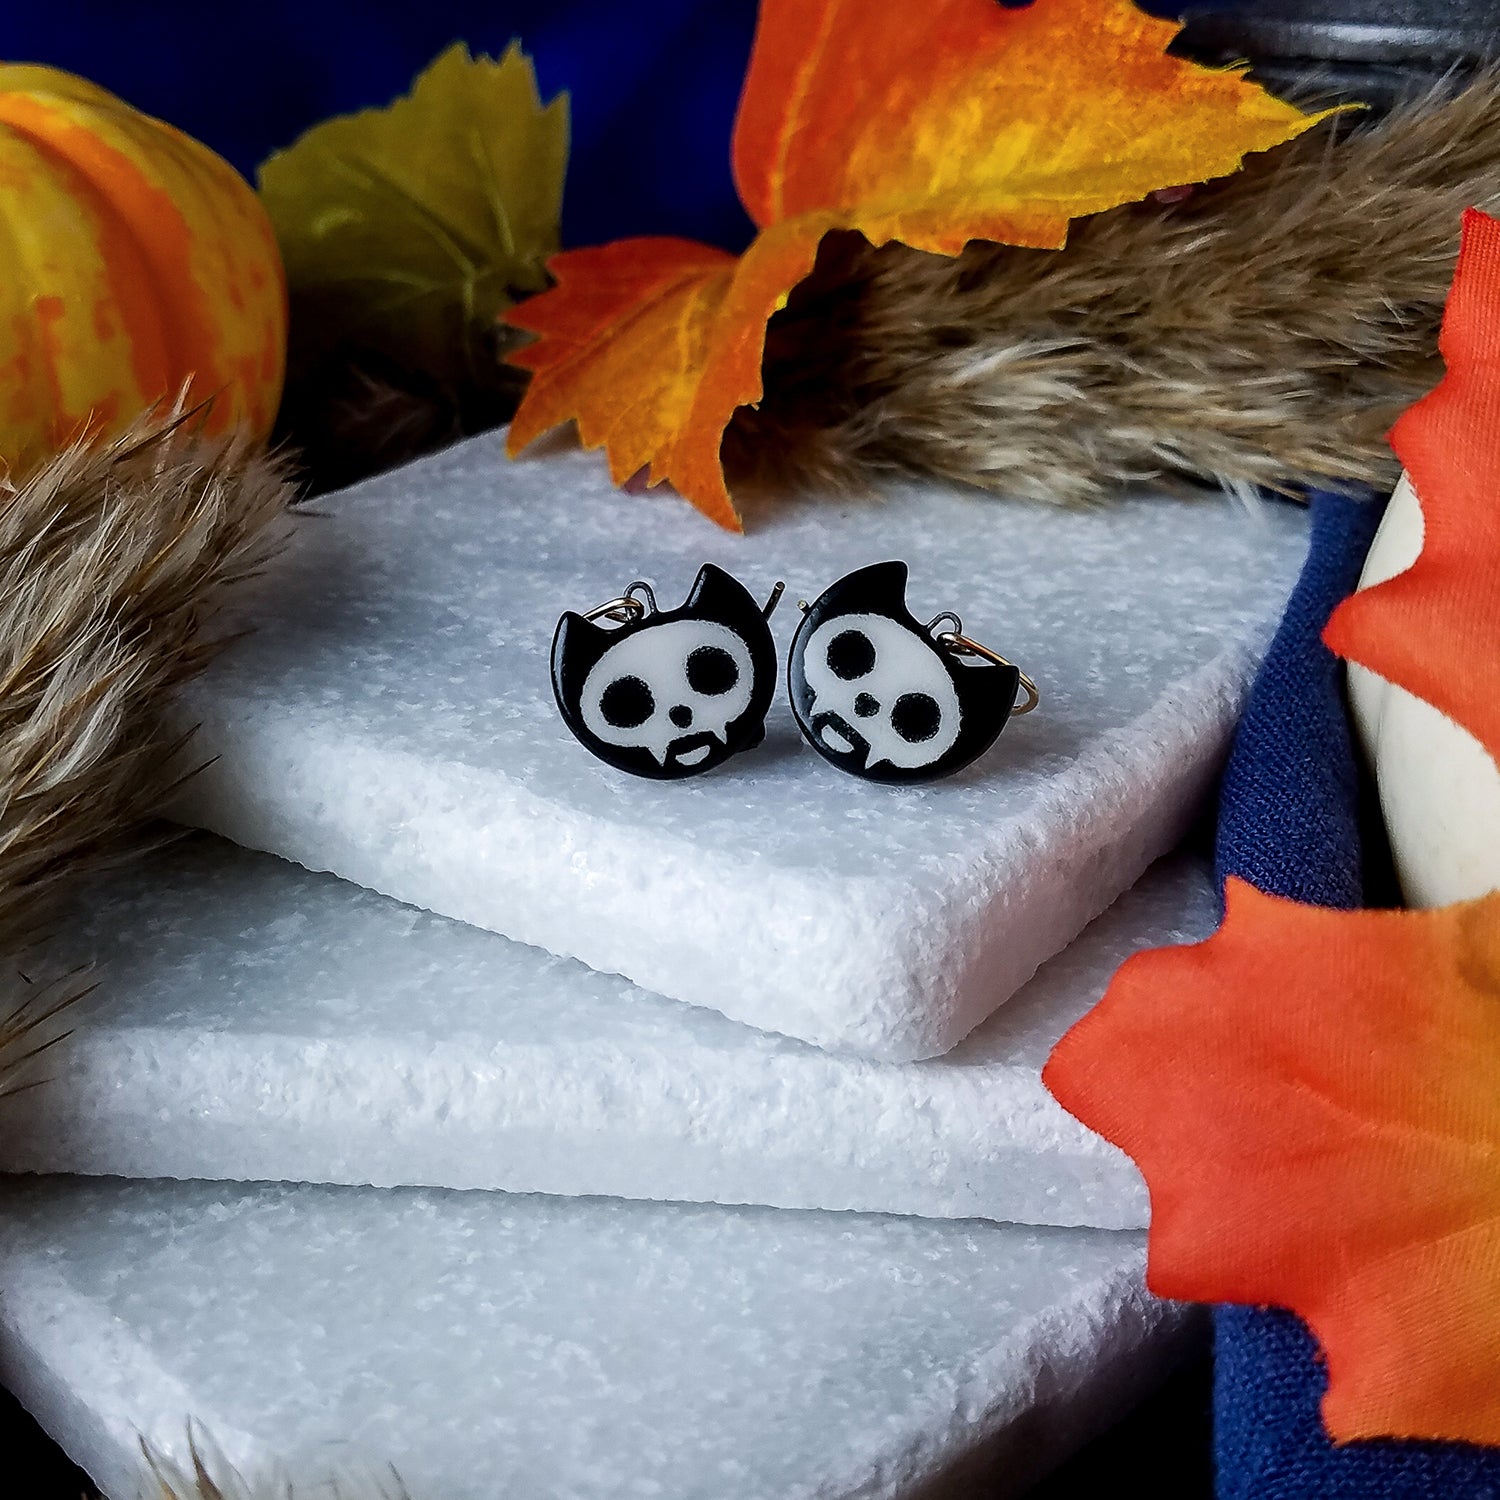 Porcelain cat heads painted as Skelecat cat skulls on gold-filled curved ear wires.  Earrings are on a stack of white marble blocks, surrounded by Autumnal items – leaves, pumpkins, and dried grasses – with a blue night sky background.